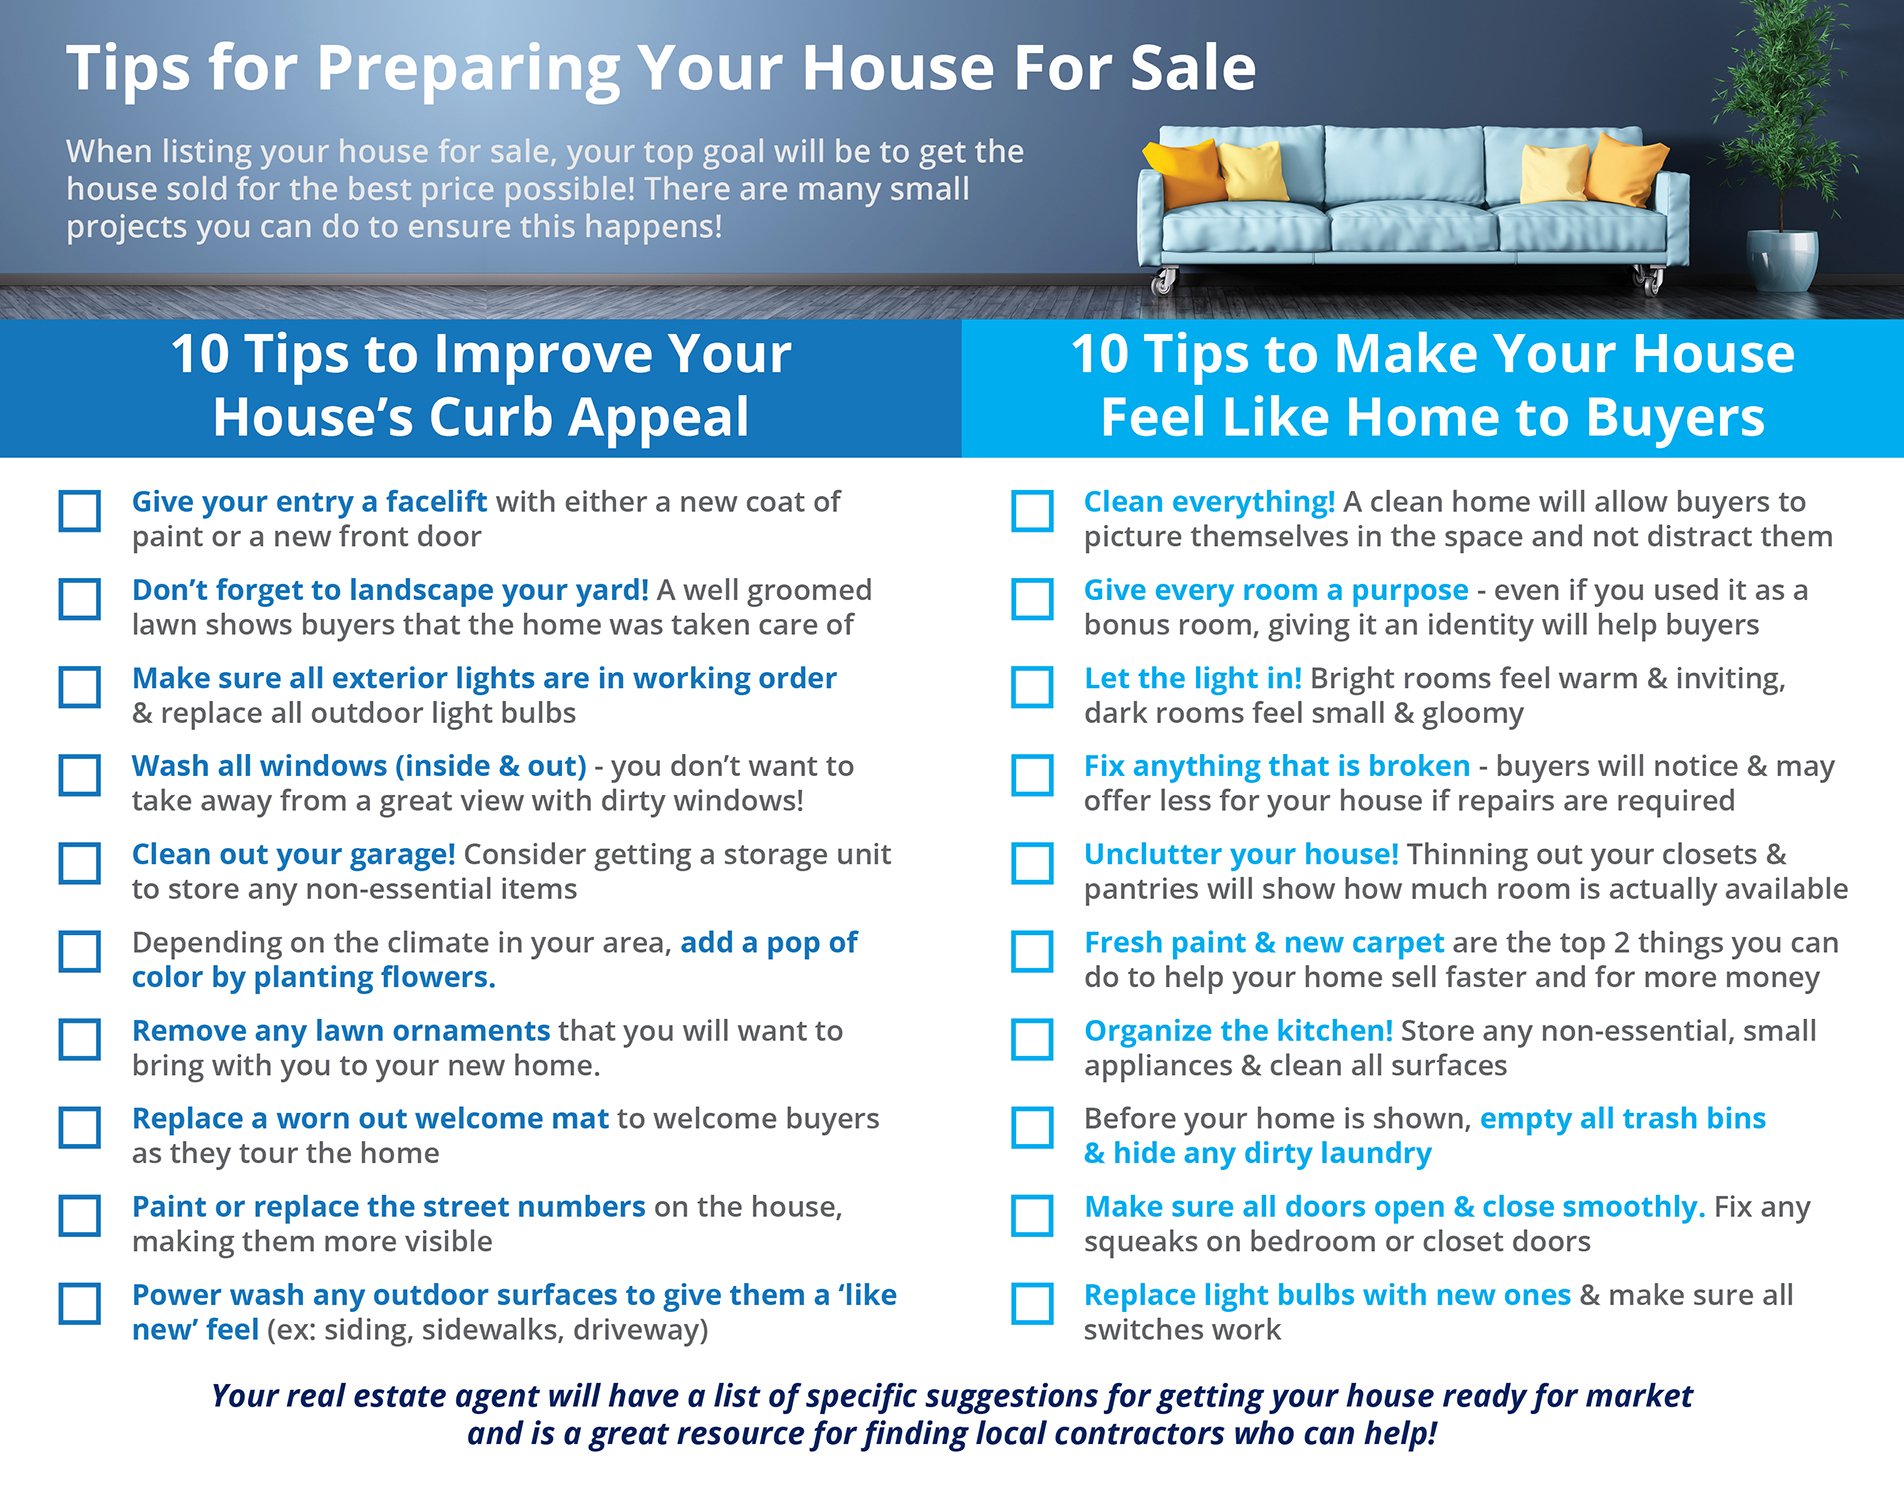 20 Tips for Preparing Your House for Sale [INFOGRAPHIC] | Simplifying The Market